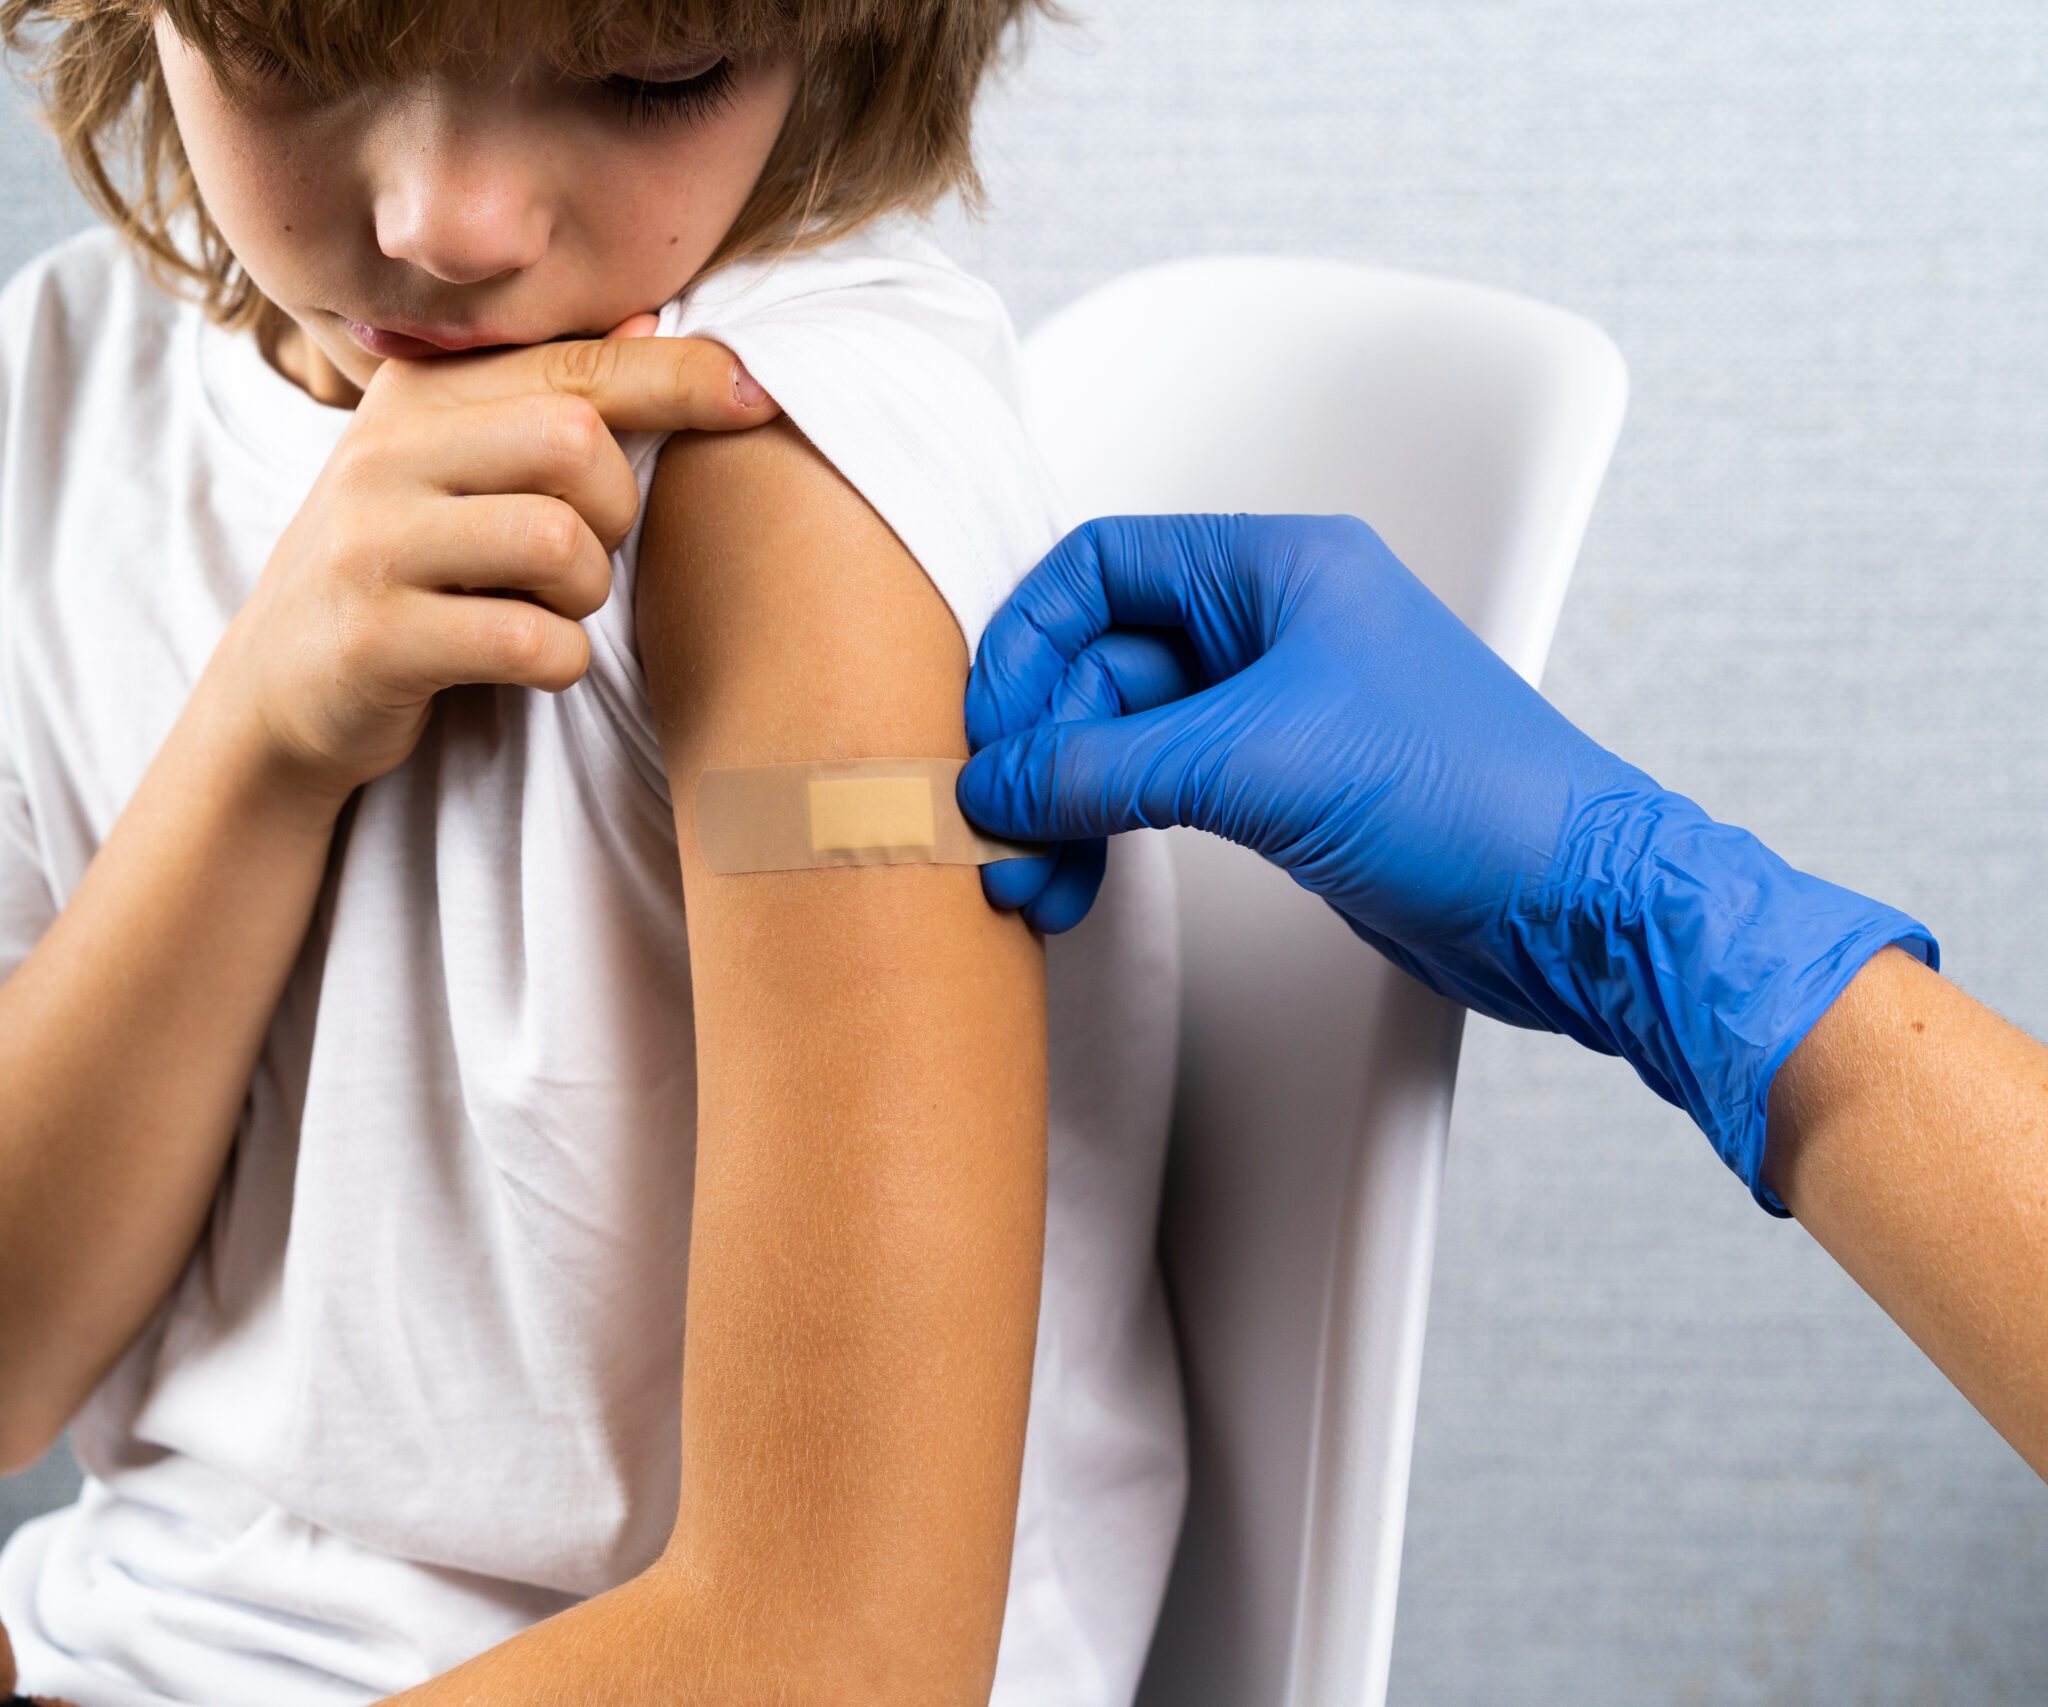 vaccination of children, a little boy at a doctor's appointment, an injection in the arm, children's medicine, an injection in the arm.